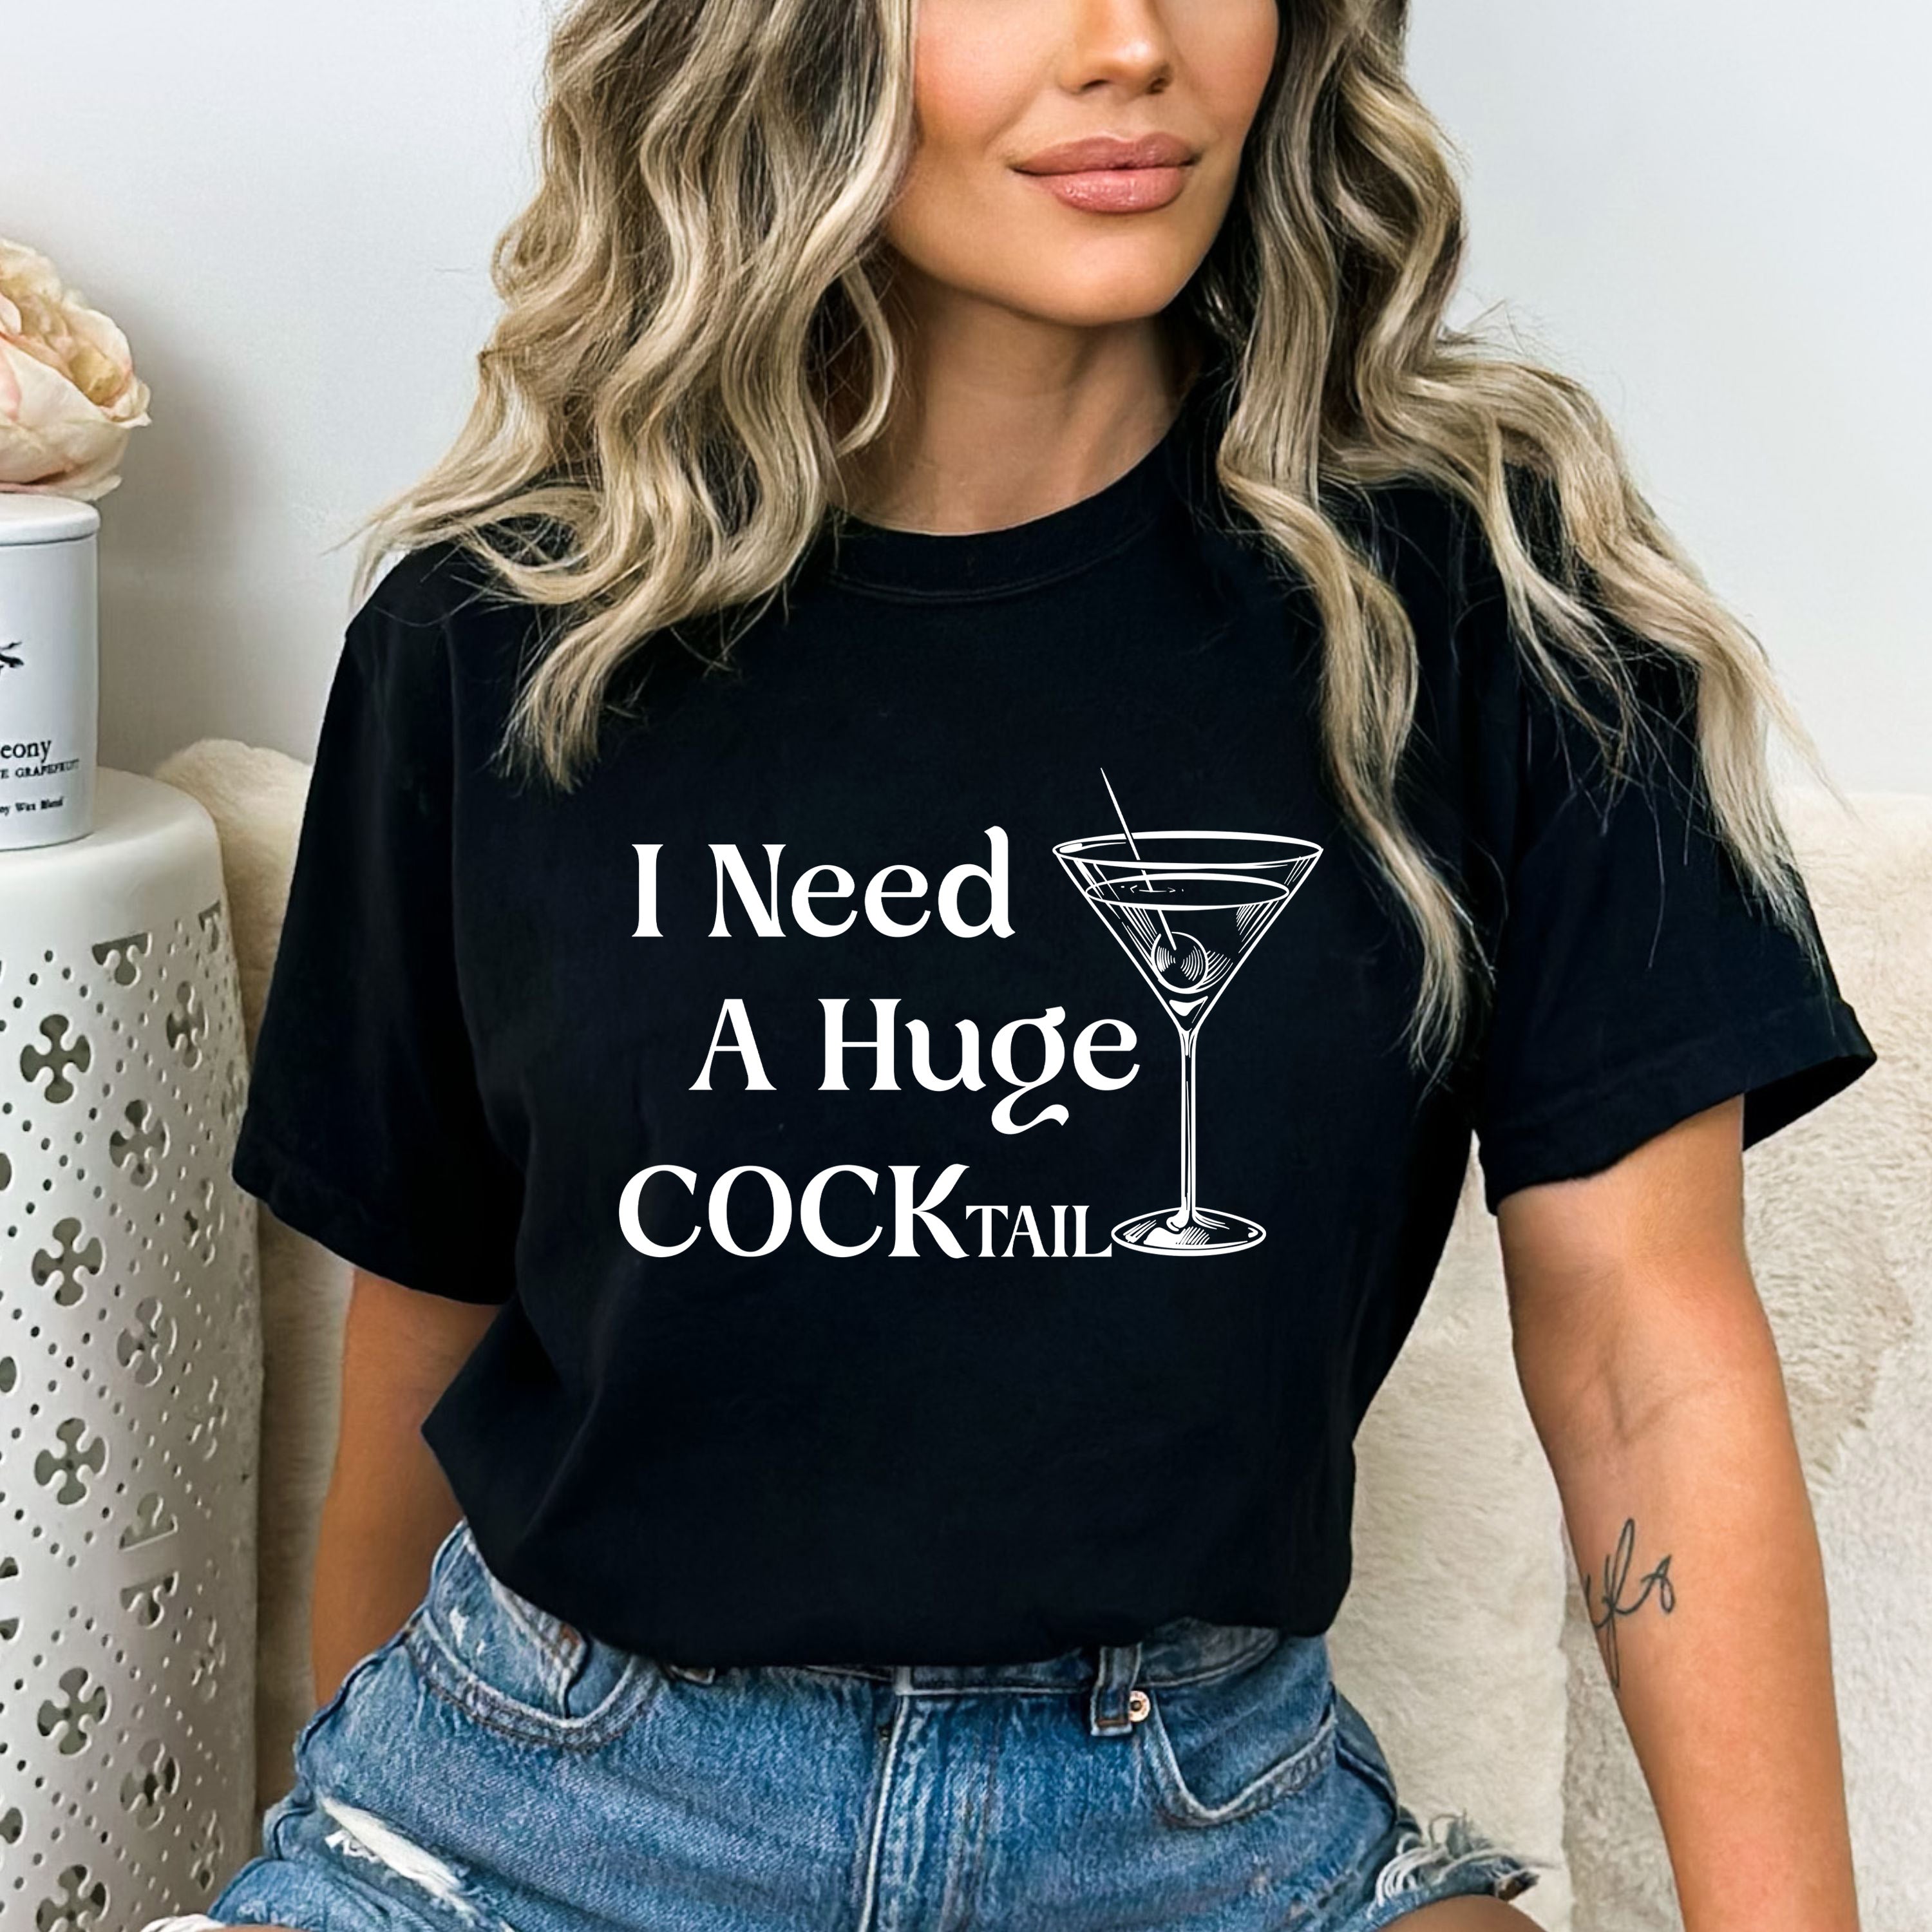 I Need A Huge Cocktail - Bella canvas